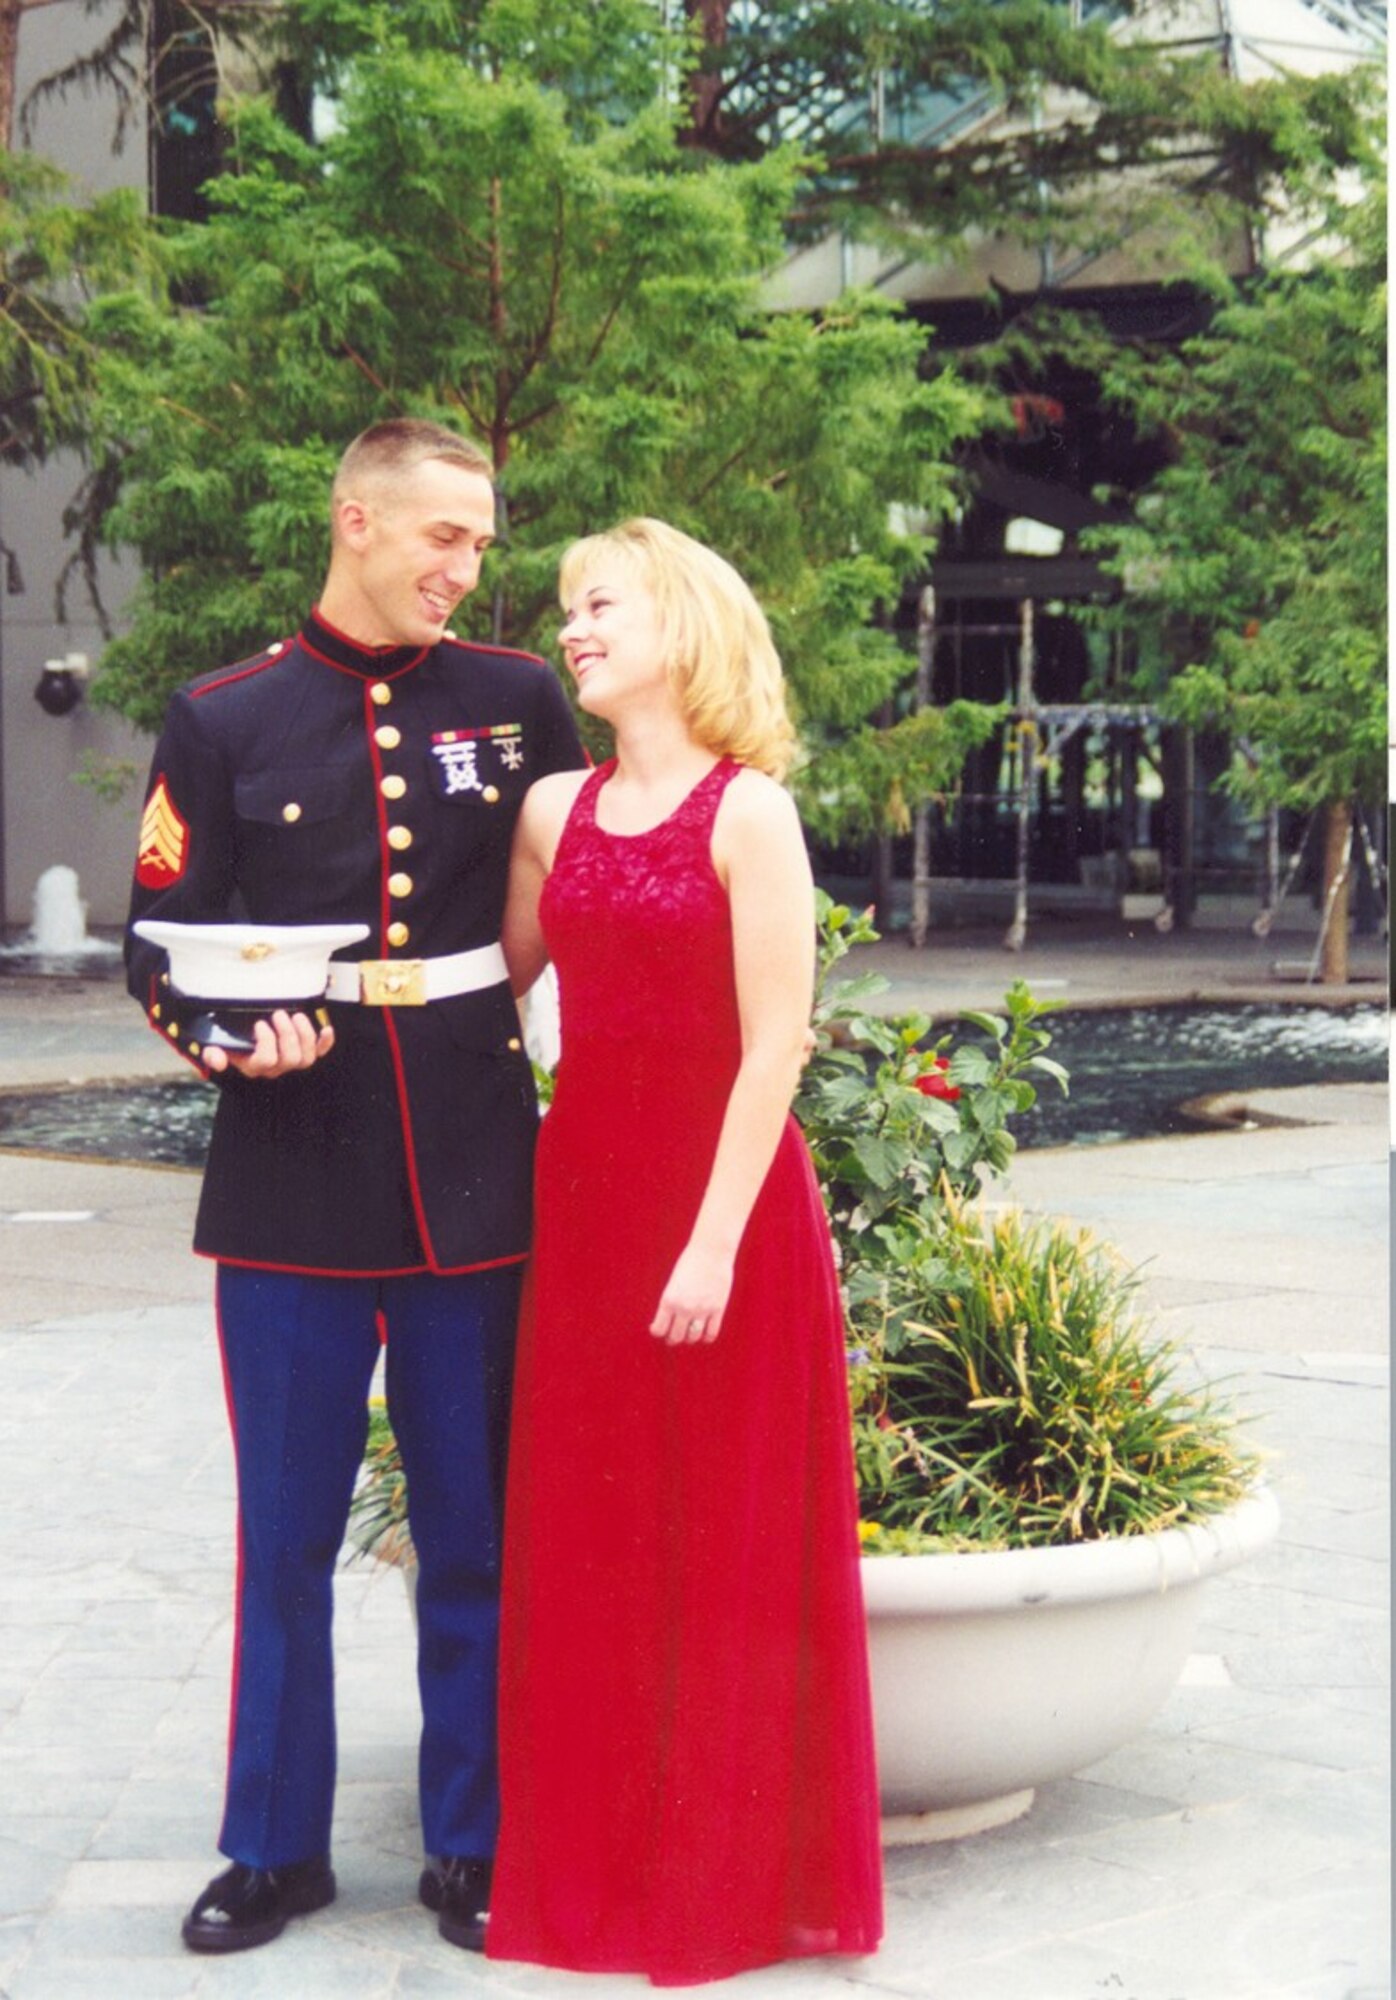 Master Sgt. Matthew Sheley embracing his wife, Andrea.